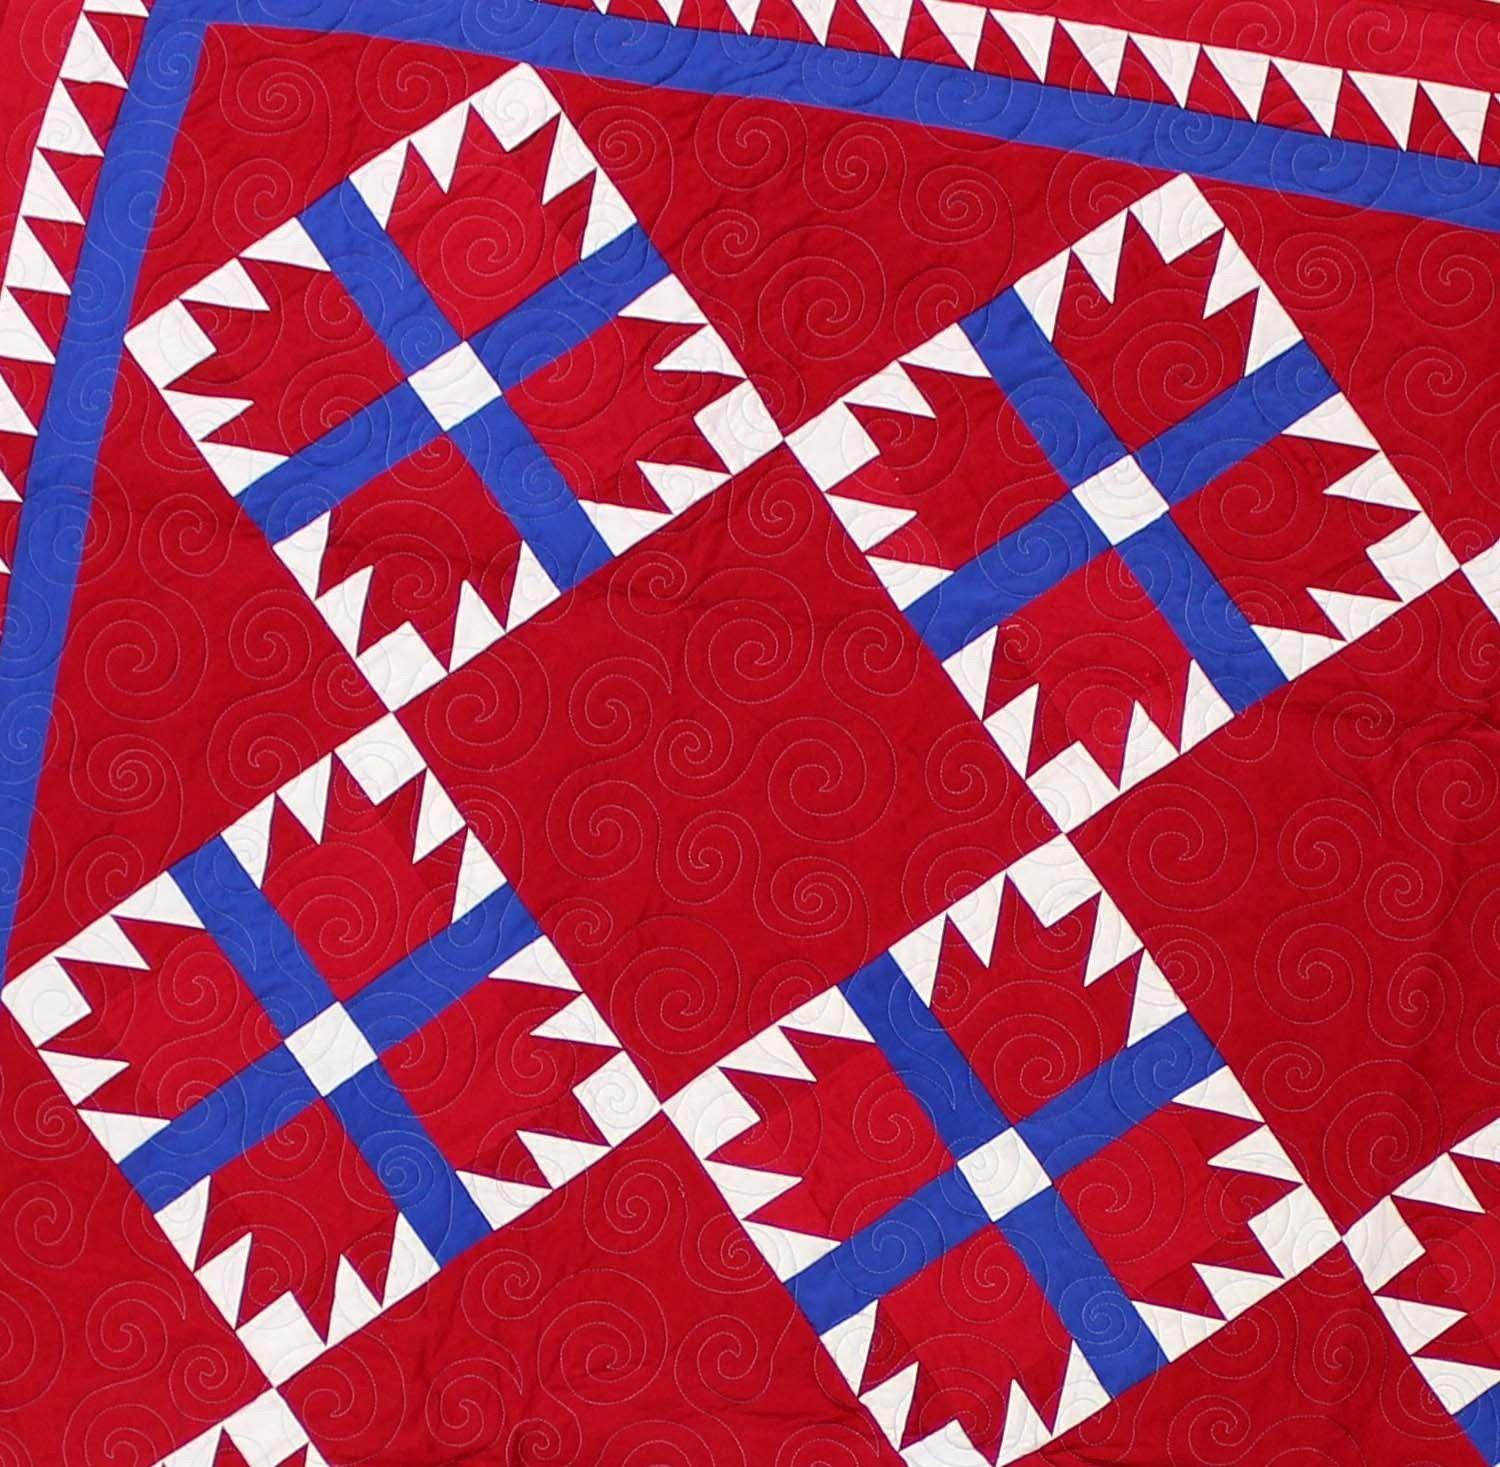 Blue Bear Paw Logo - Amish styled Red, White and Blue Bear Paw FINISHED QUILT – Patriotic ...